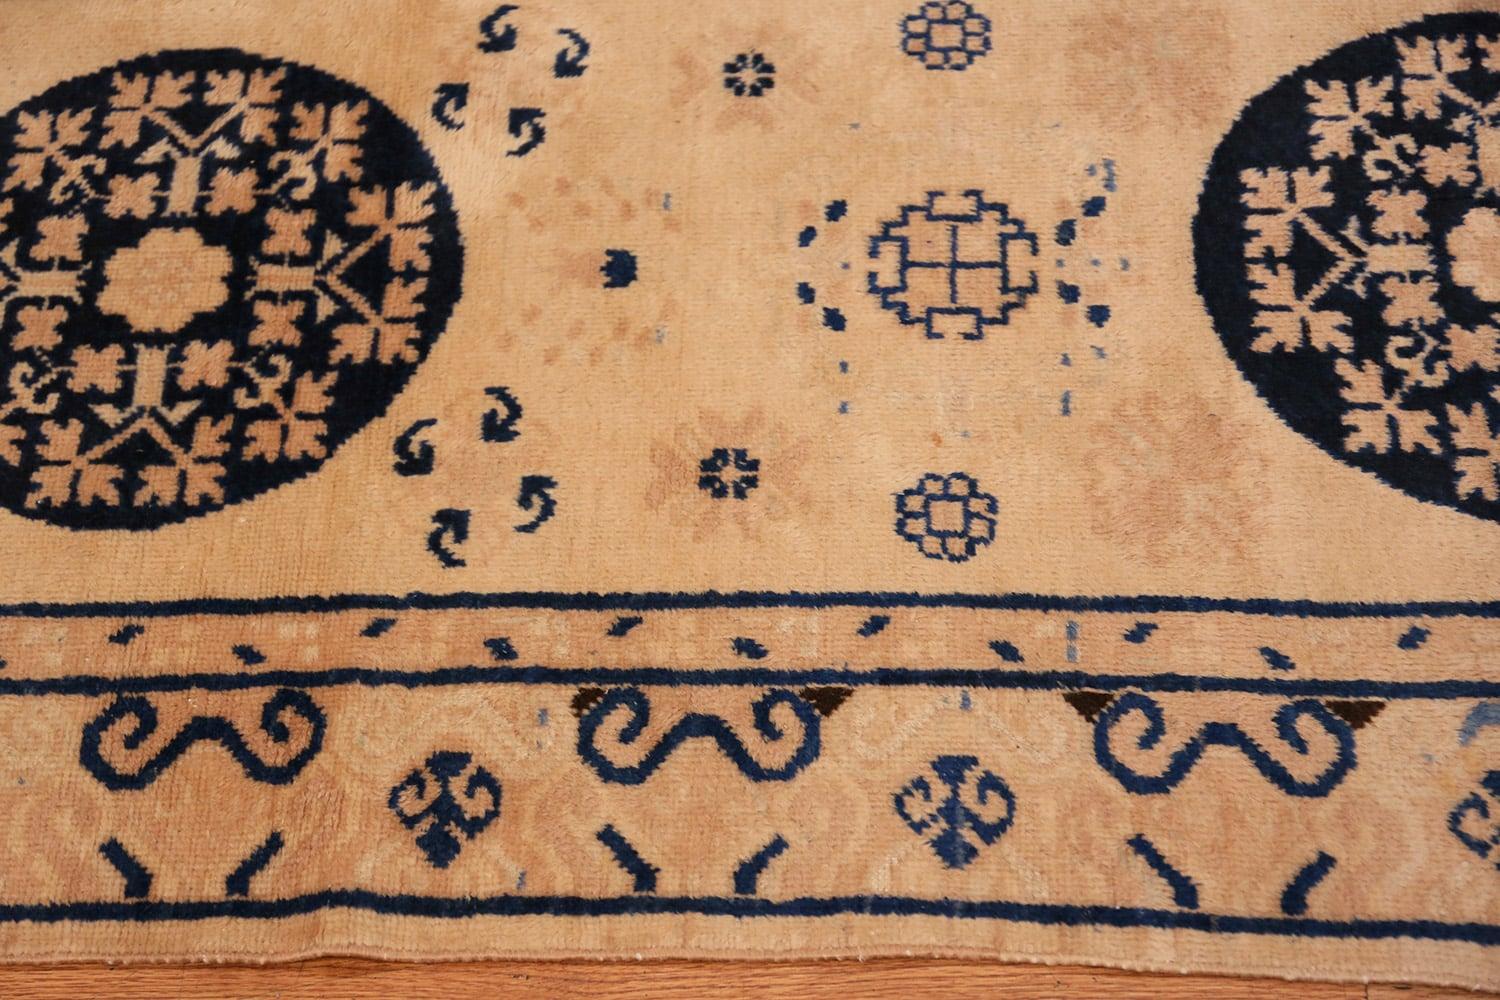 Beautiful ivory and blue decorative antique Khotan runner rug, country of origin: East Turkestan, circa early 20th century. Size: 3 ft x 10 ft 5 in (0.91 m x 3.17 m)

